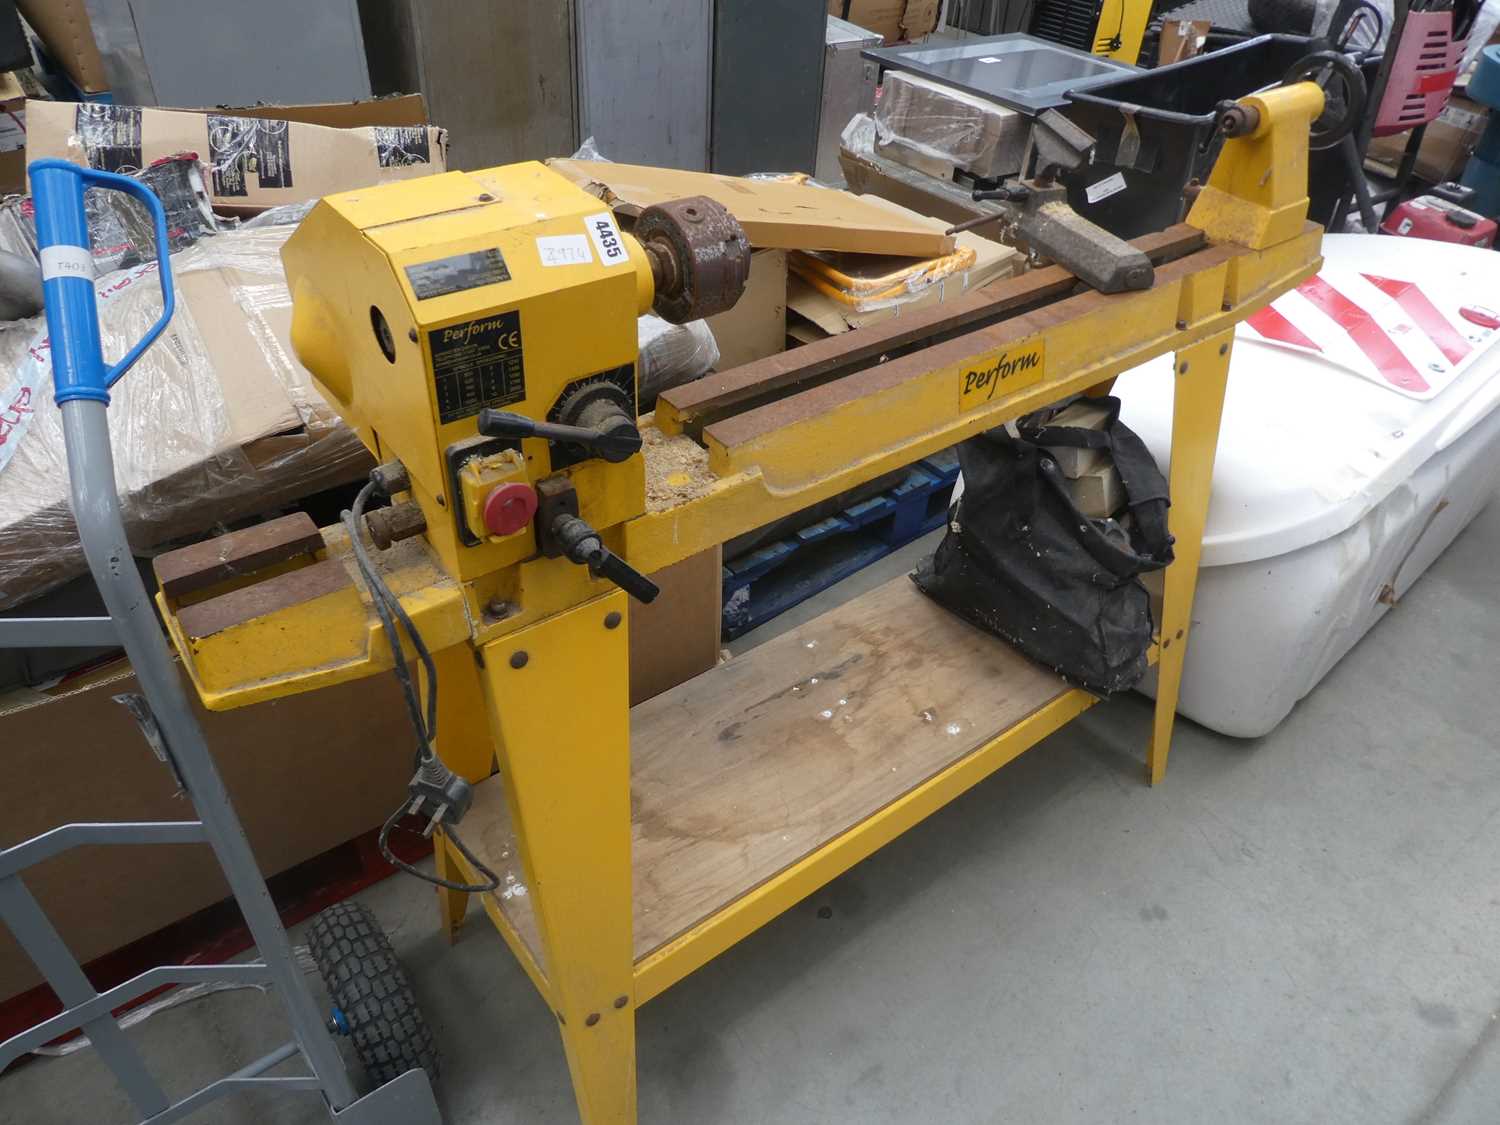 Lot 4435 - Perform metal woodworking lathe on stand